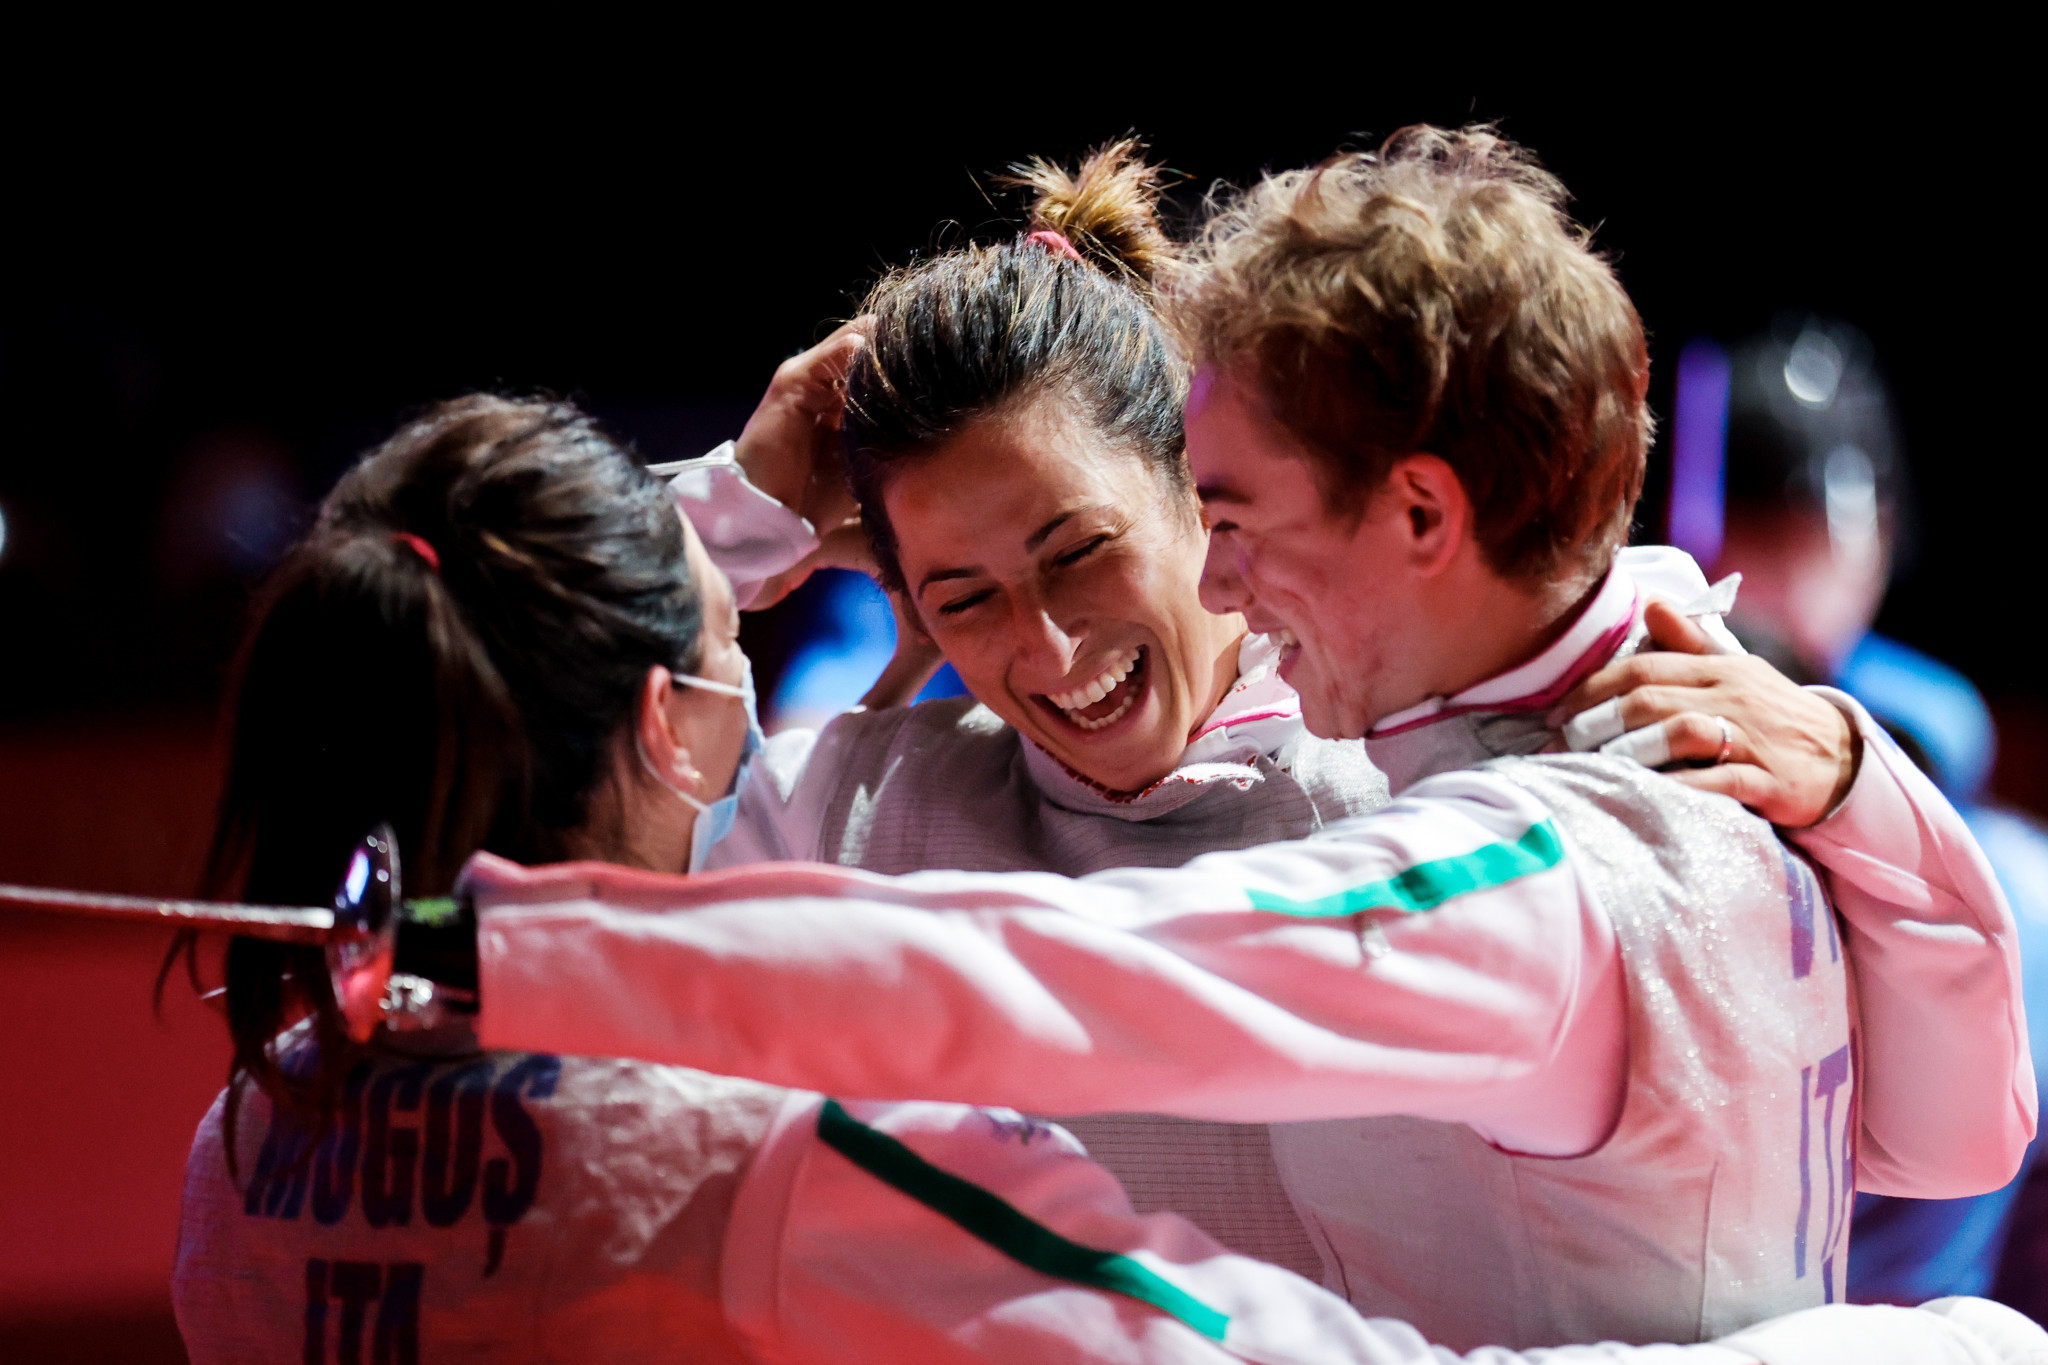 Italy captured the women's foil senior team gold in Pisa ©Getty Images